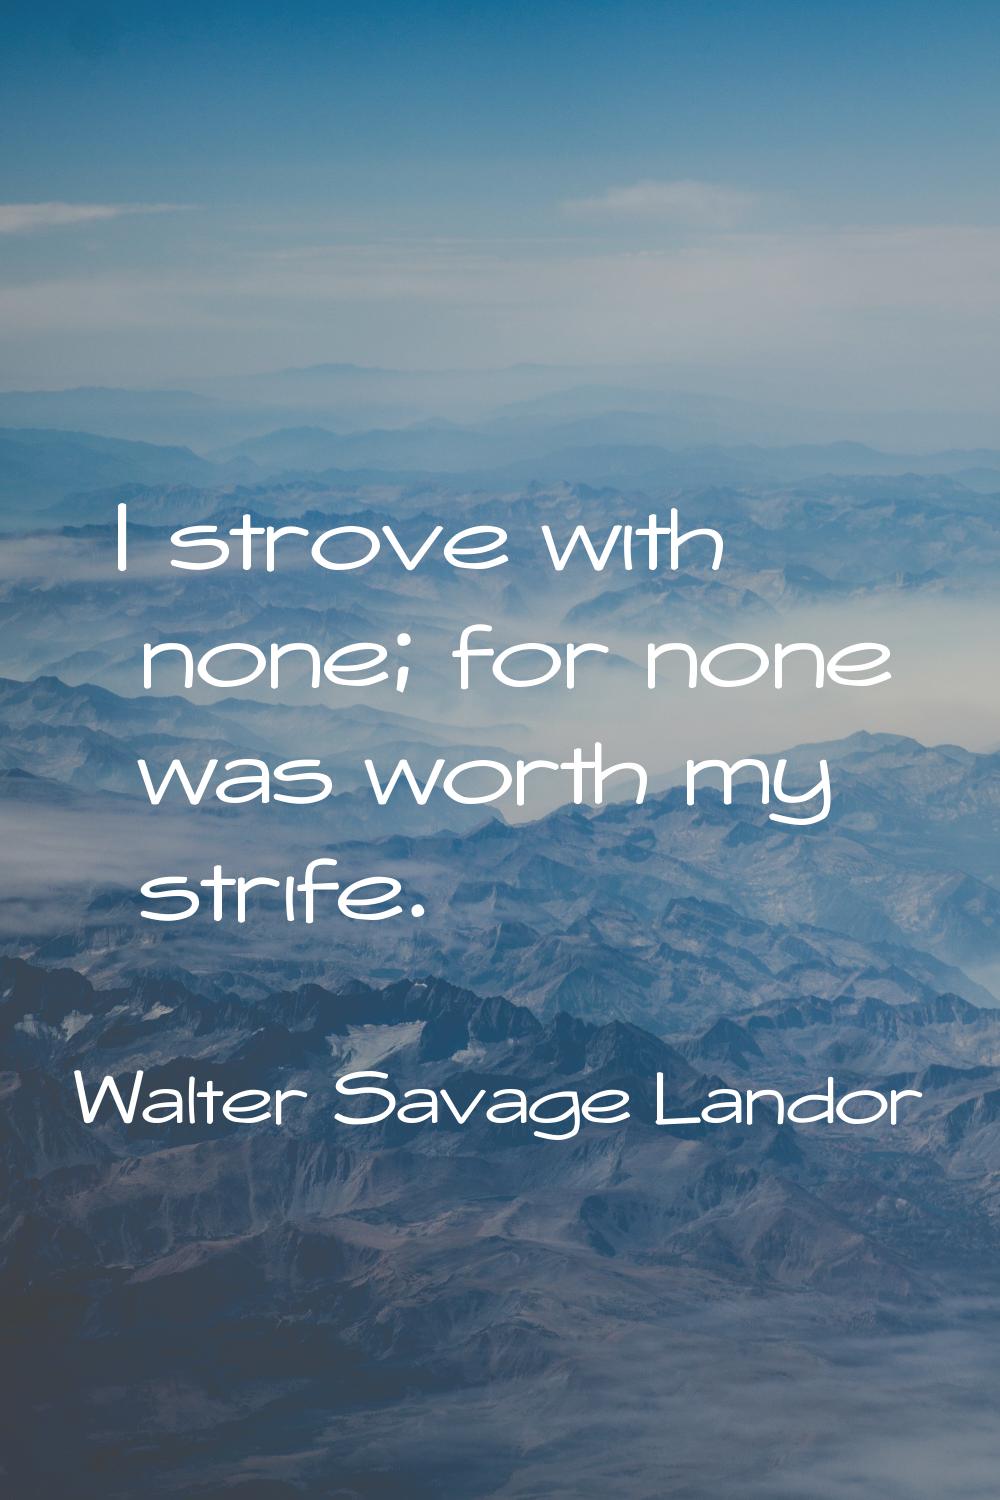 I strove with none; for none was worth my strife.